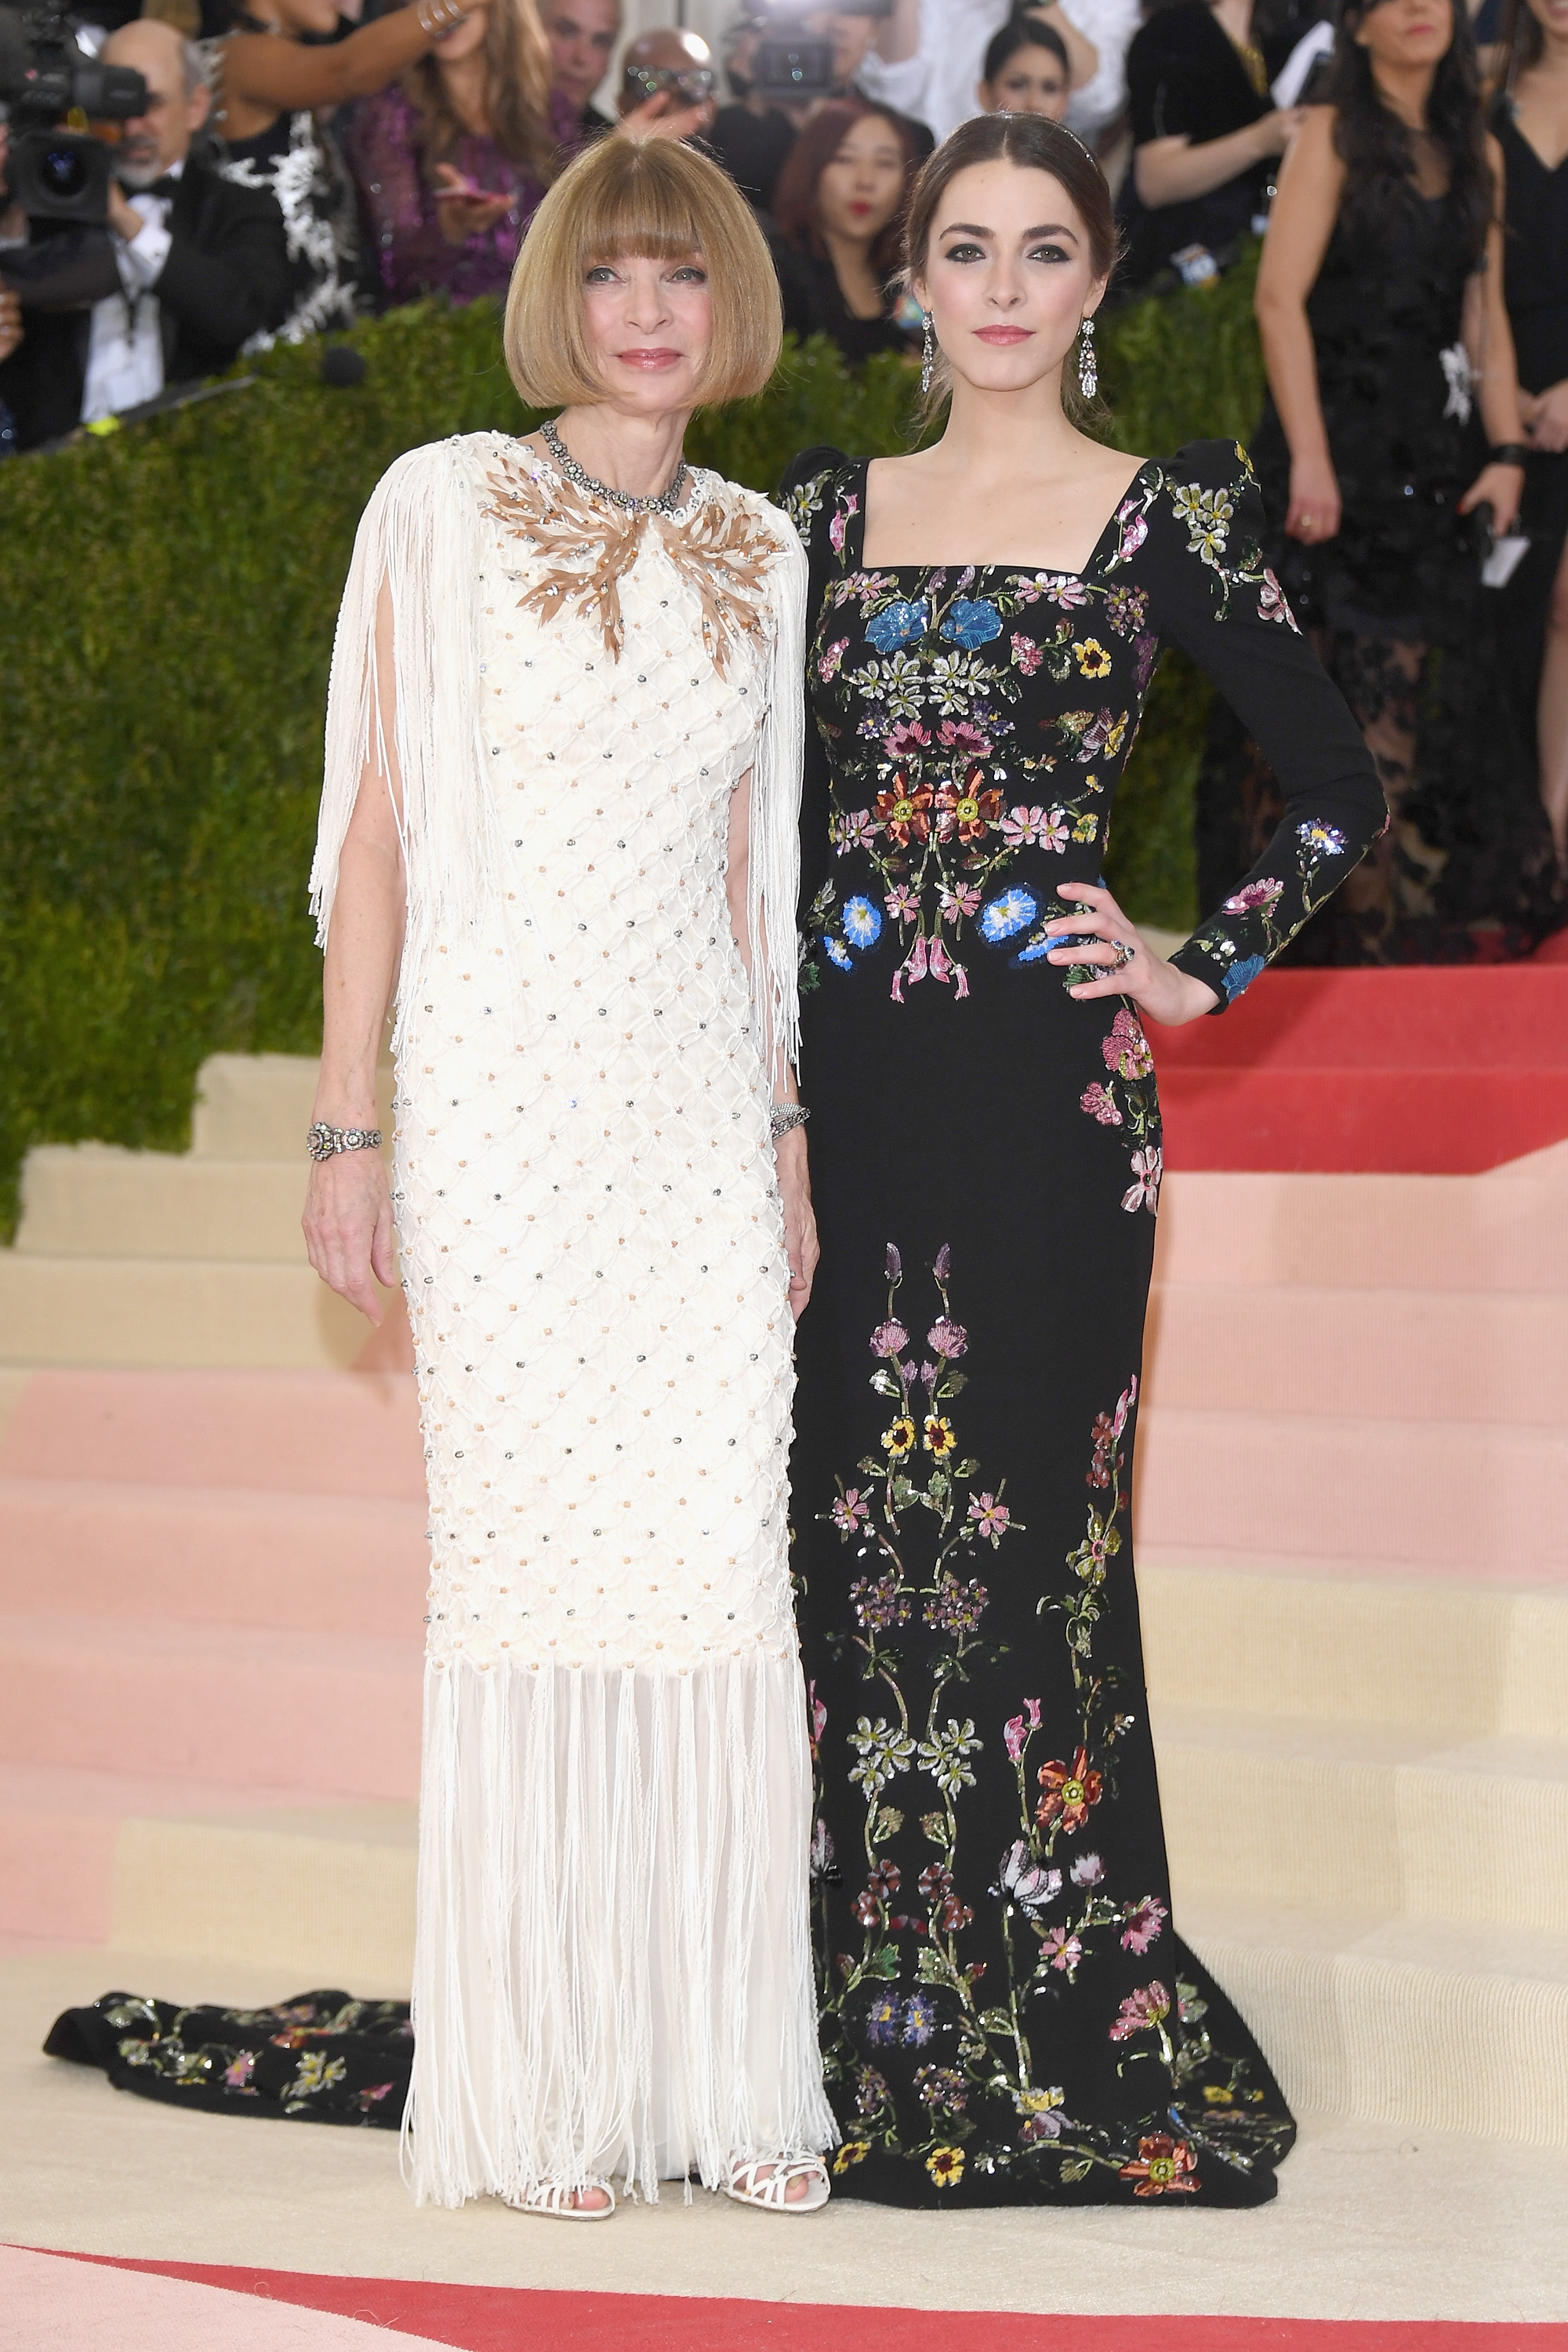 Anna Wintour and Bee Shaffer attend  Manus x Machina: Fashion In An Age Of Technology  Costume Institute Gala at Metropolitan Museum of Art on May 2, 2016 in New York City.